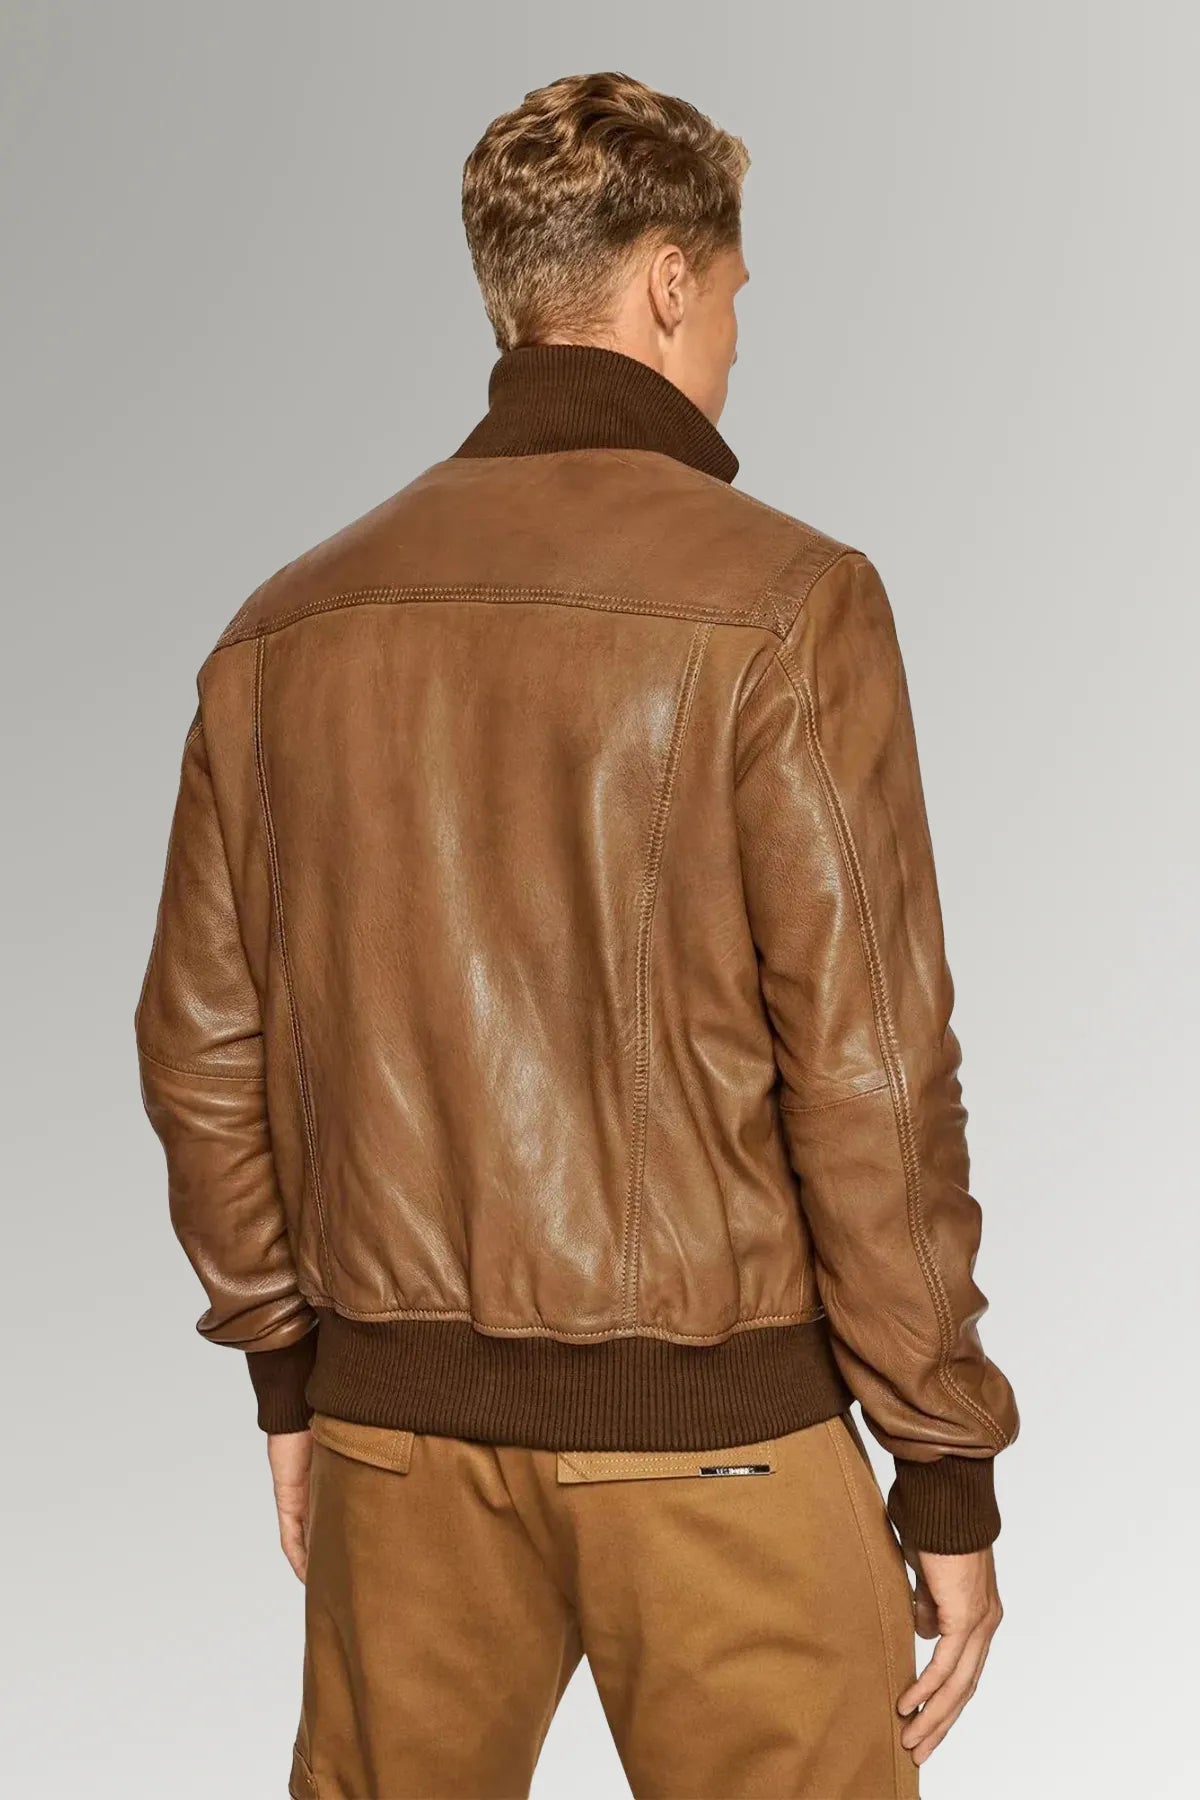 Brown Biker Style Men’s Ripped Leather Jacket